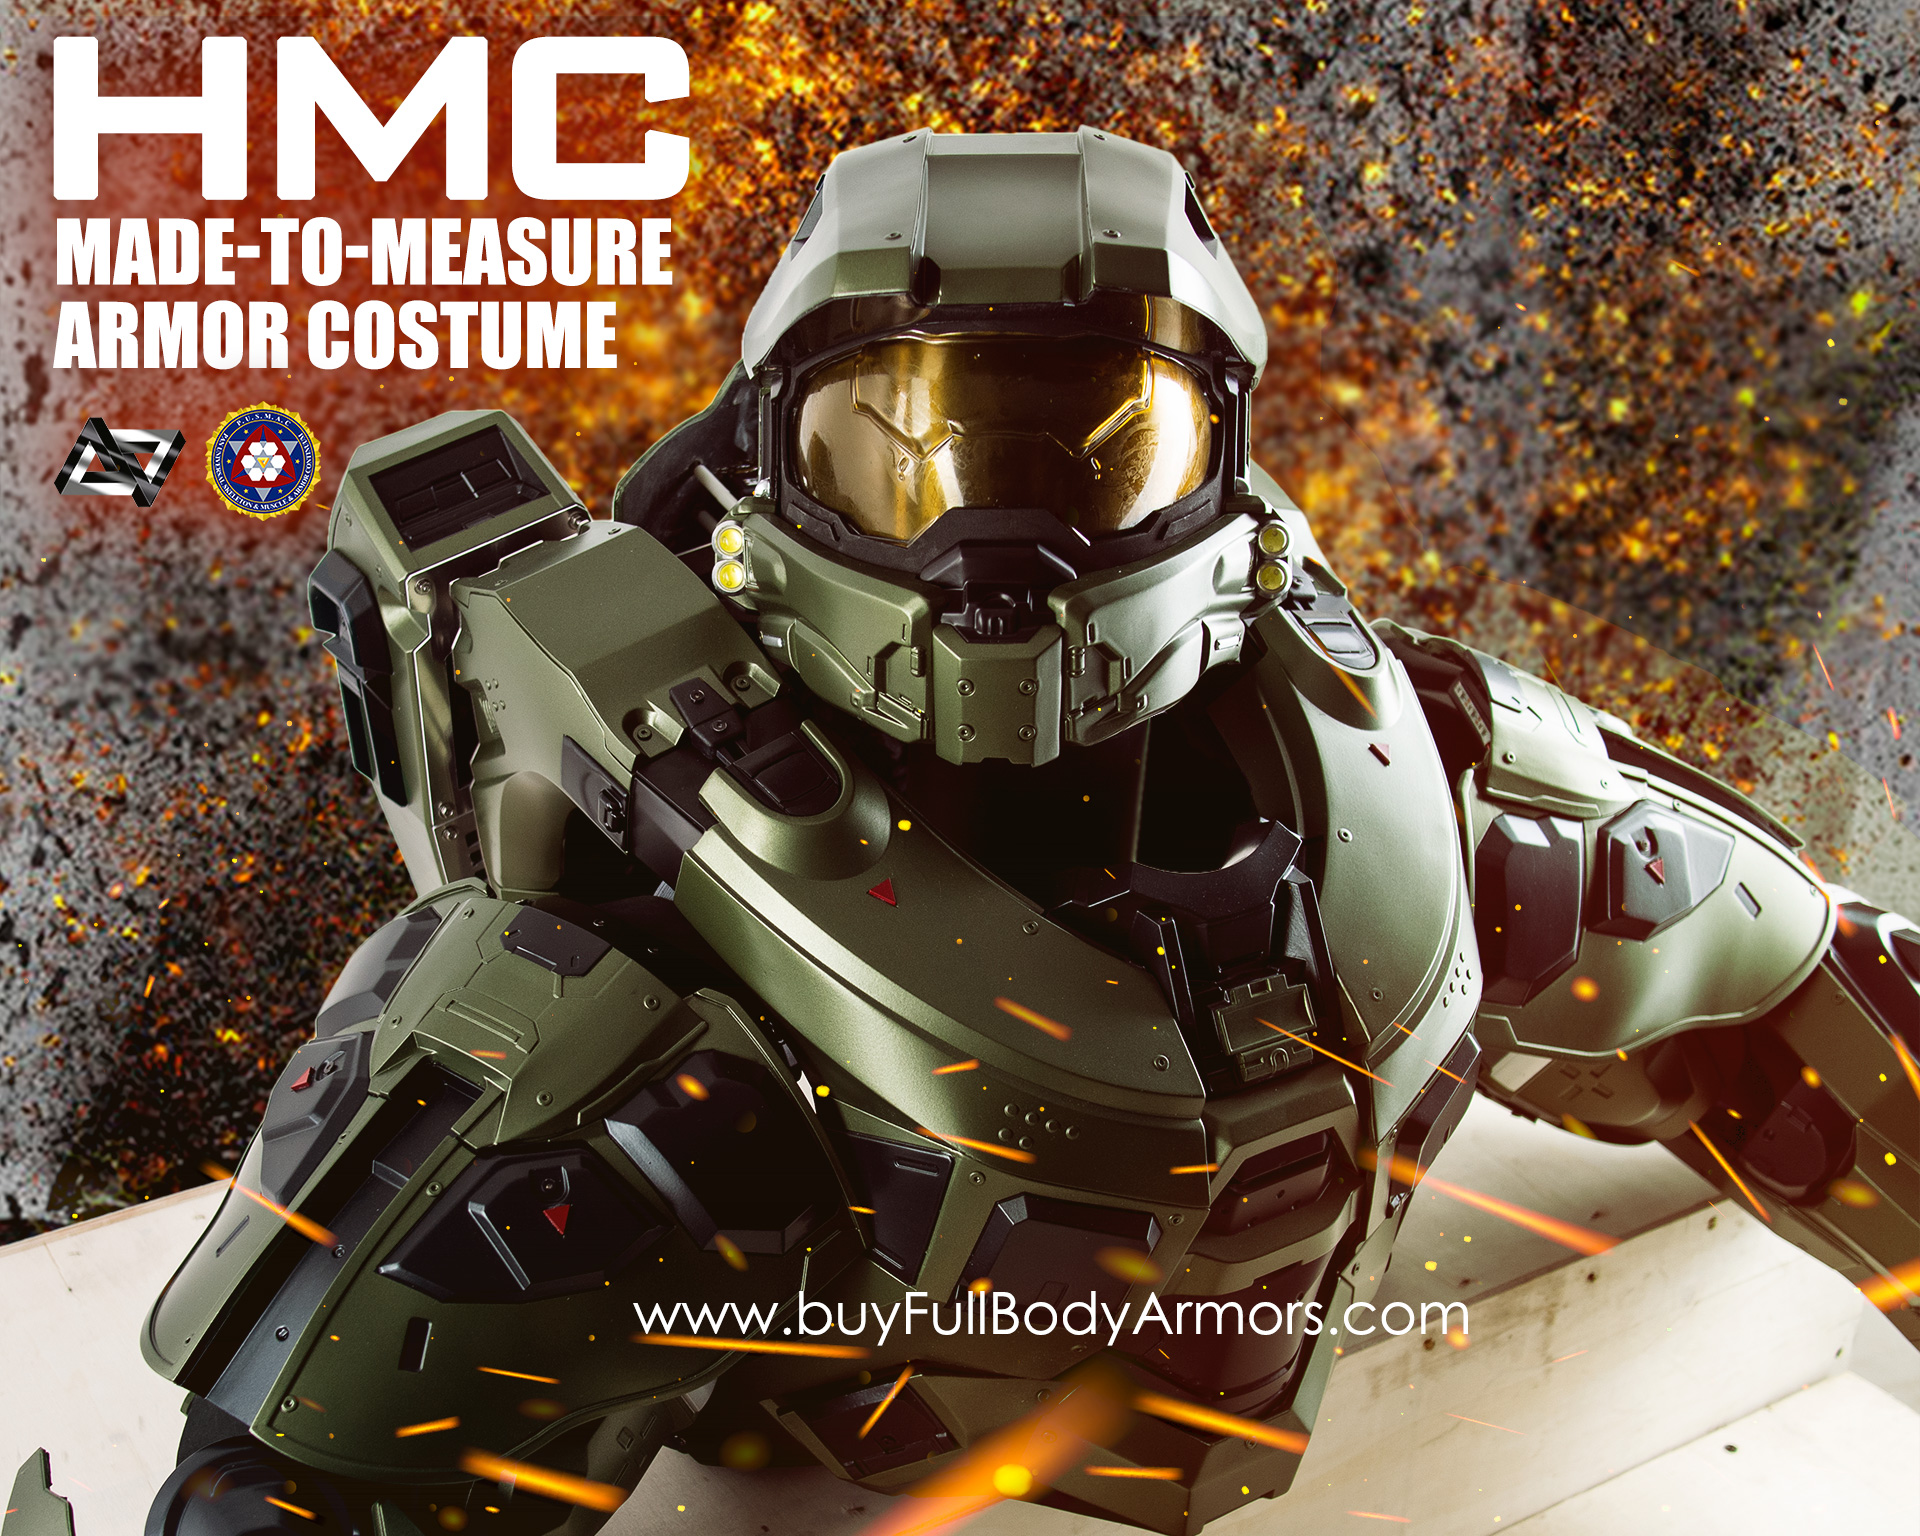 Wearable Halo 4 and Halo 5 Master Chief Armor Mark VI Suit Costume pictures 6